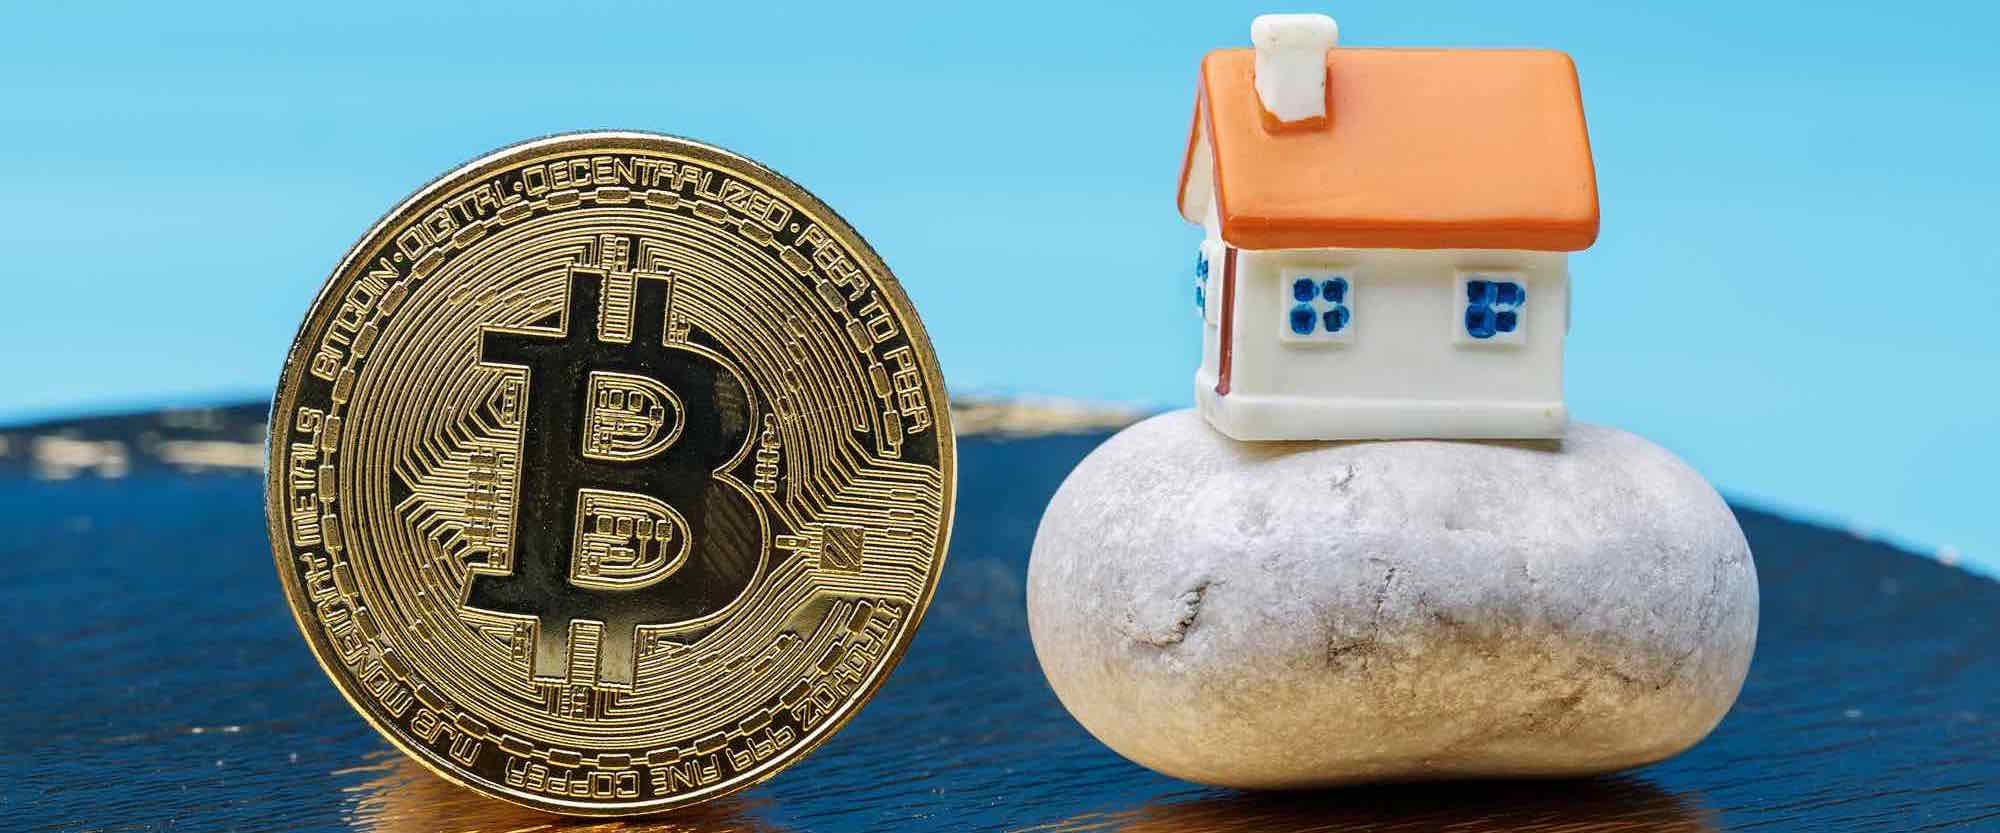 Buy A House With Bitcoin? Our Opinion On Cryptocurrency Property Purchases